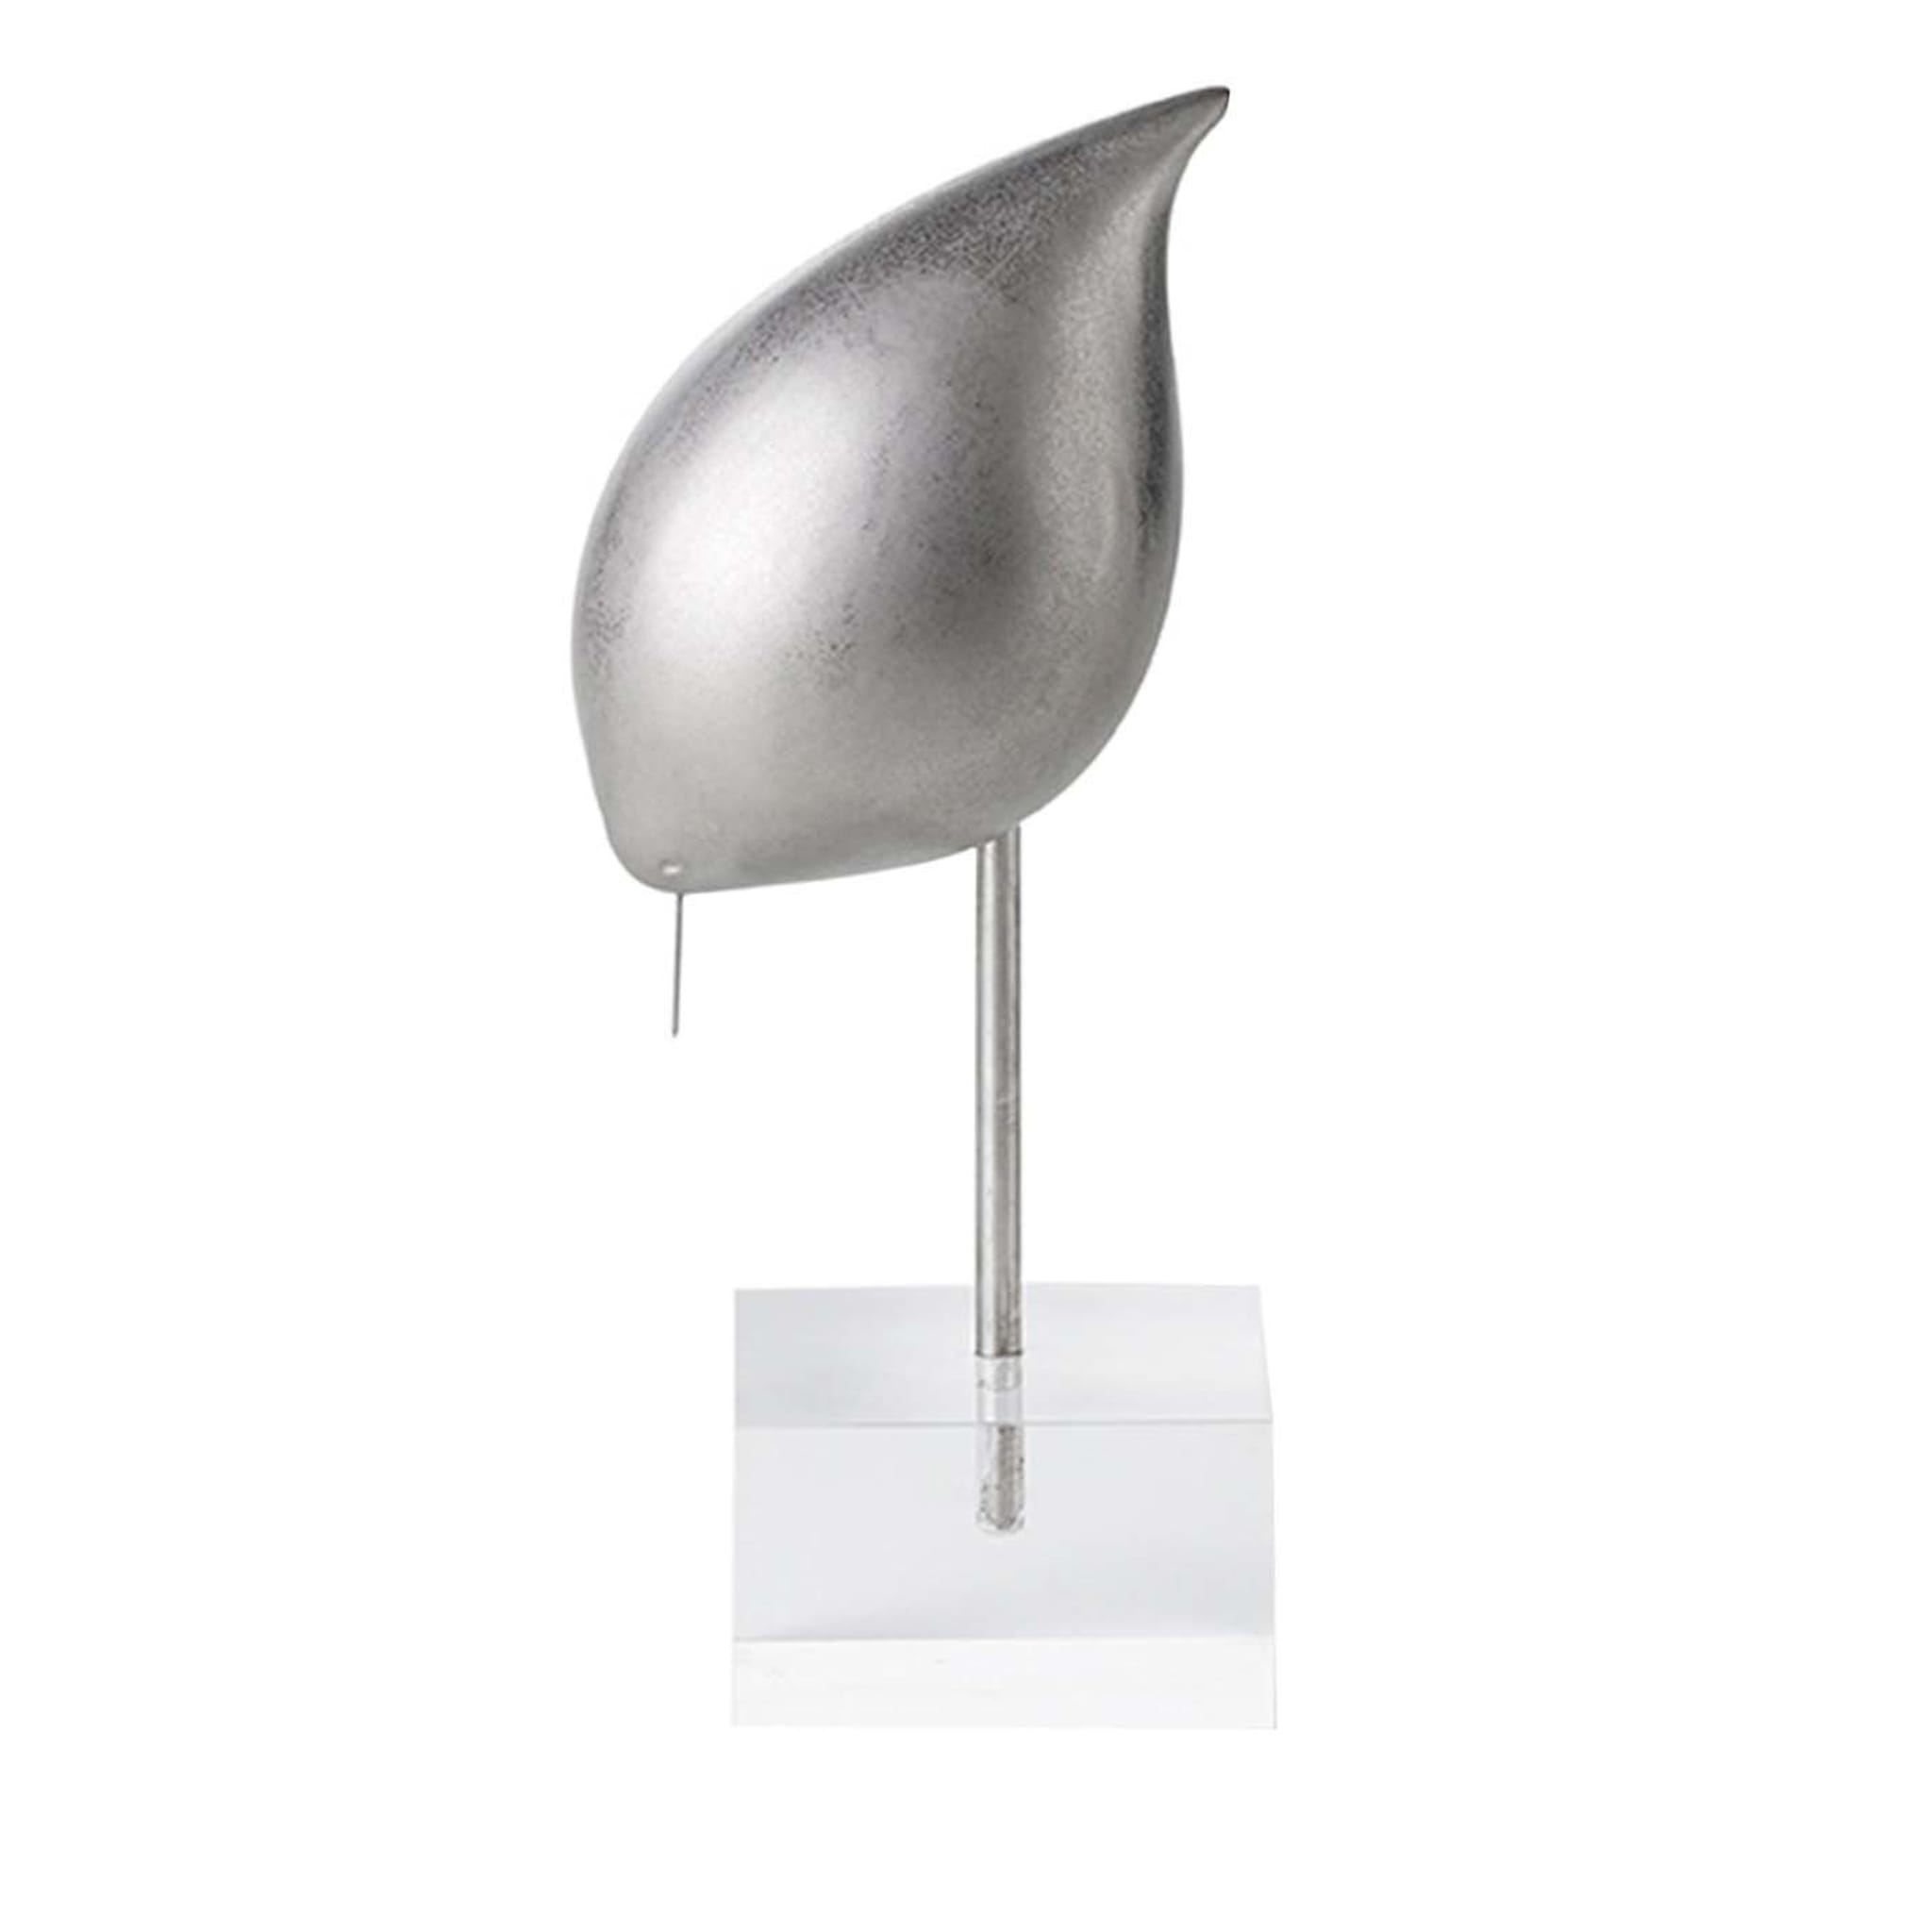 Silver Bird on a Stand by Aldo Londi #1 - Main view